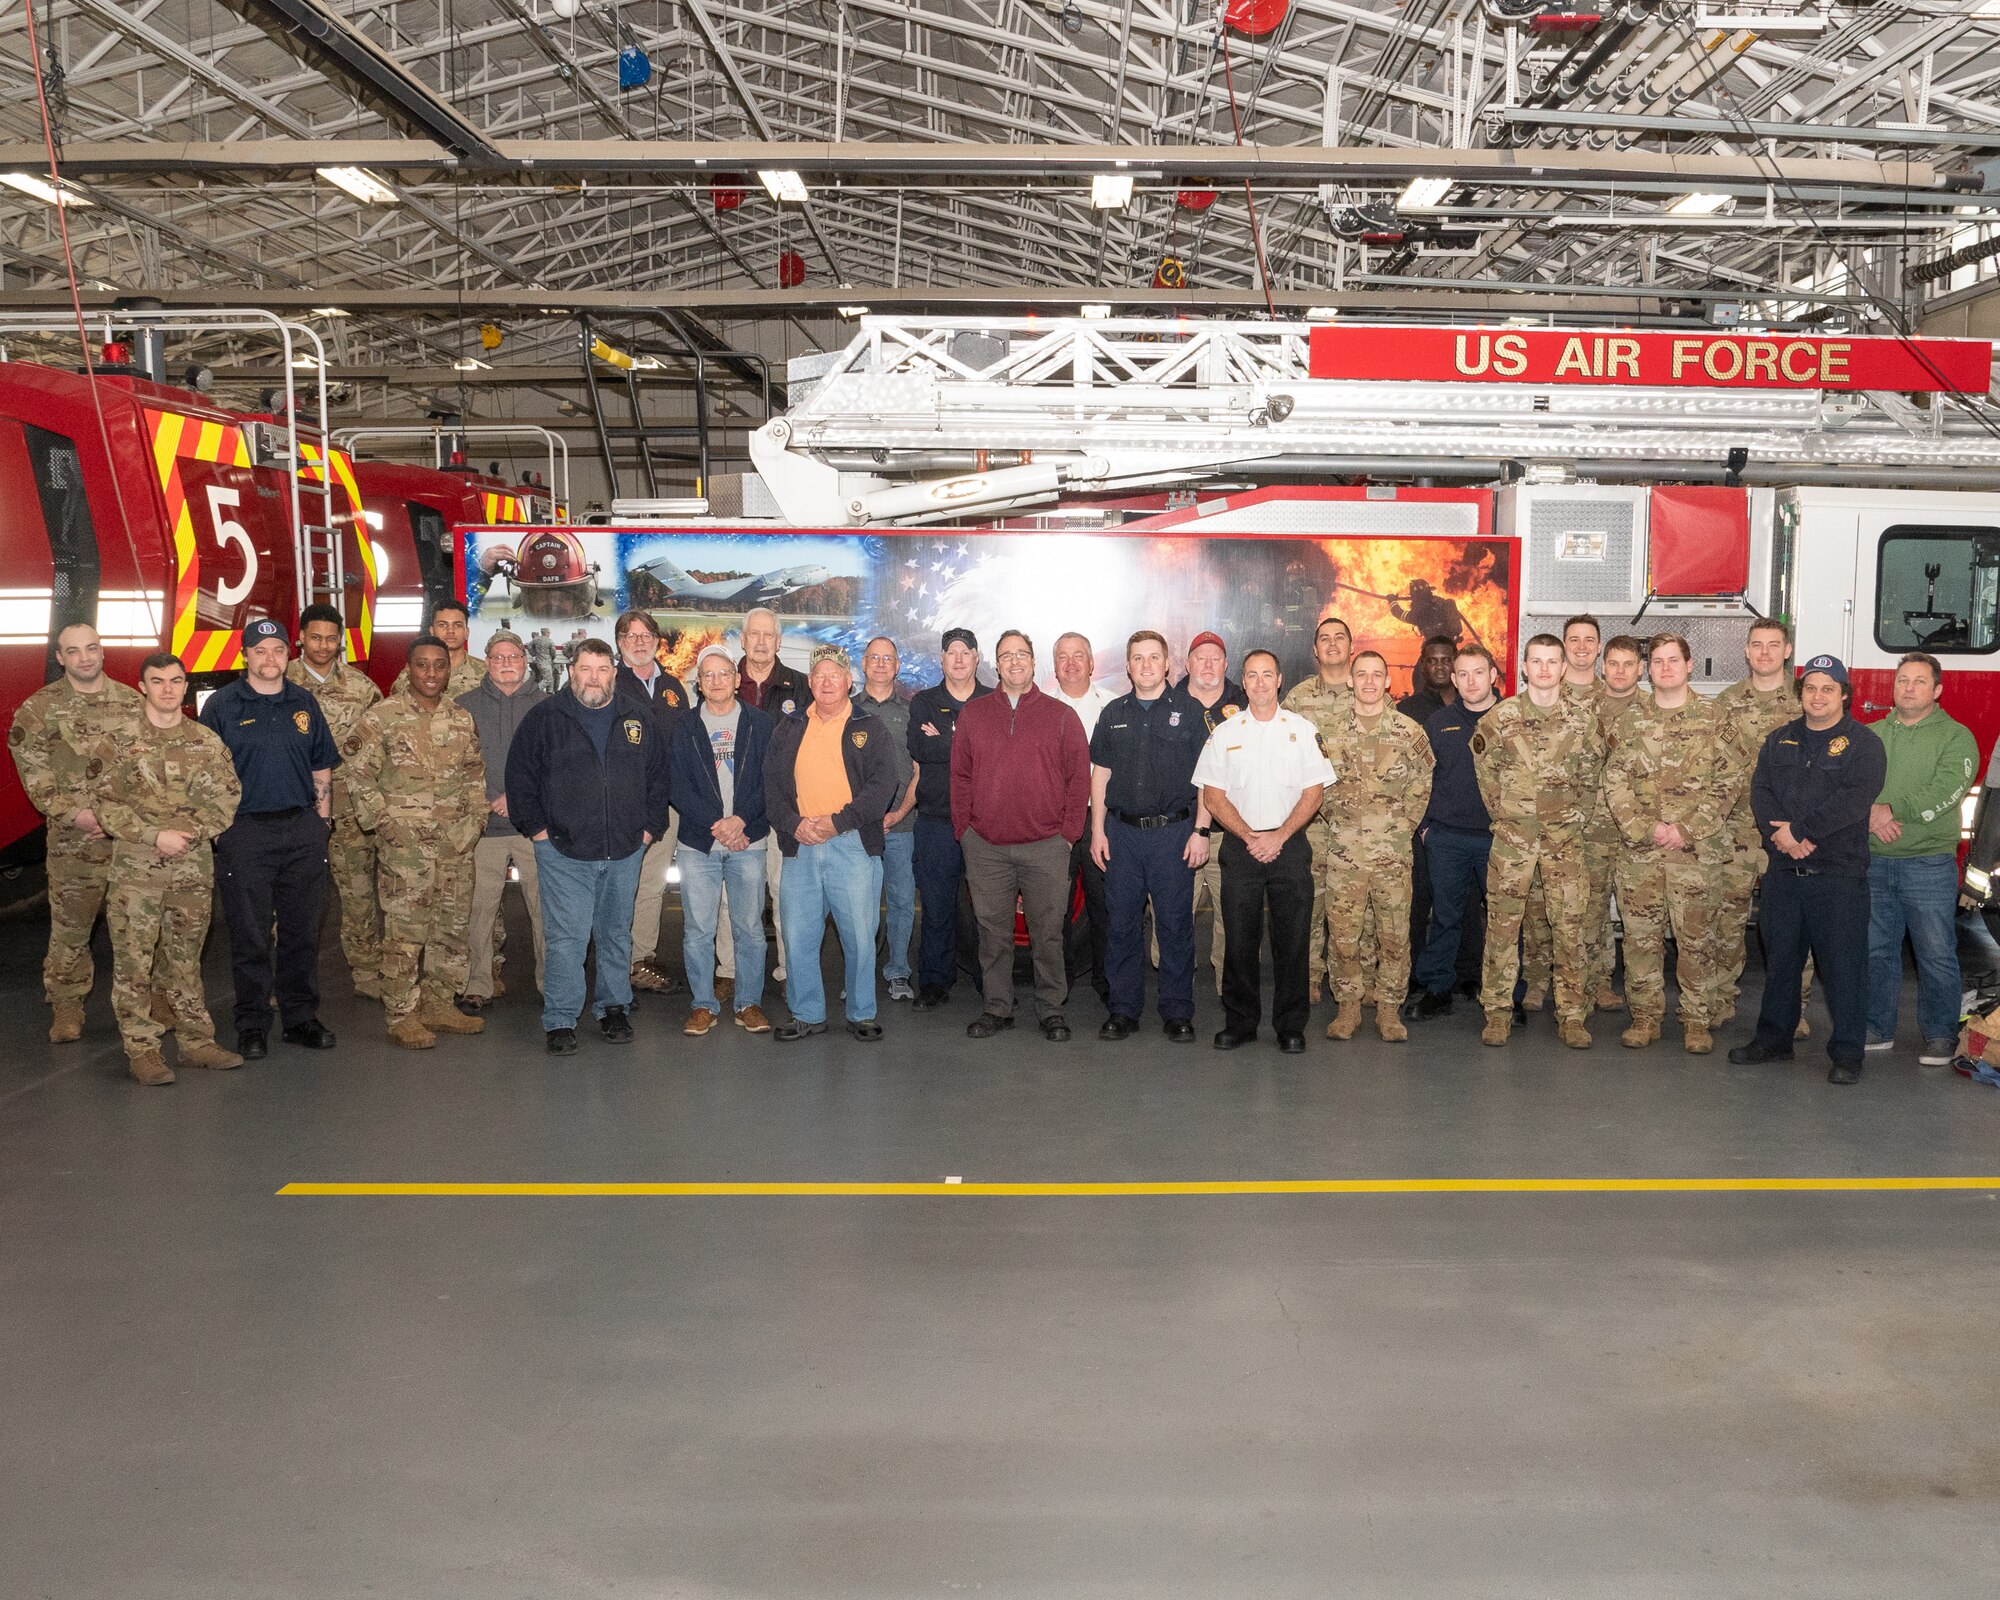 Current and retired Dover Air Force Base, Delaware, firefighters pose for a group photo during a veteran firefighter reunion on Dover AFB, Feb. 24, 2023. The 436th Civil Engineer Squadron fire department hosted the tour and welcomed 10 retired Team Dover firefighters to tour the modernized facilities and share their experiences with Airmen. (U.S. Air Force photo by Mauricio Campino)